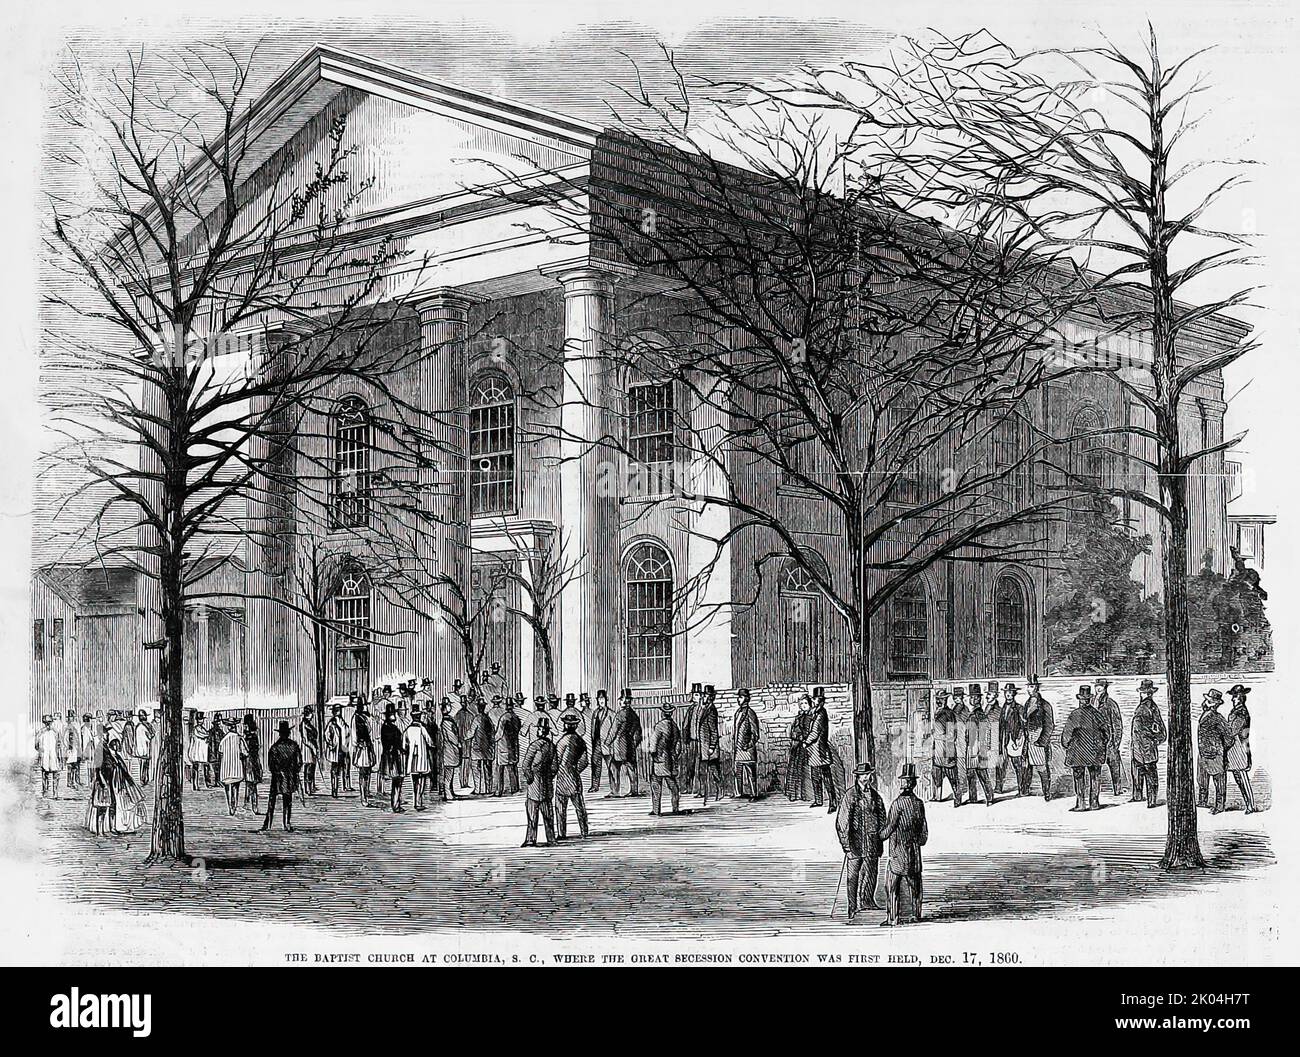 The Baptist Church at Columbia, South Carolina, where the great Secession Convention was first held, December 17th, 1860. 19th century American Civil War illustration from Frank Leslie's Illustrated Newspaper Stock Photo